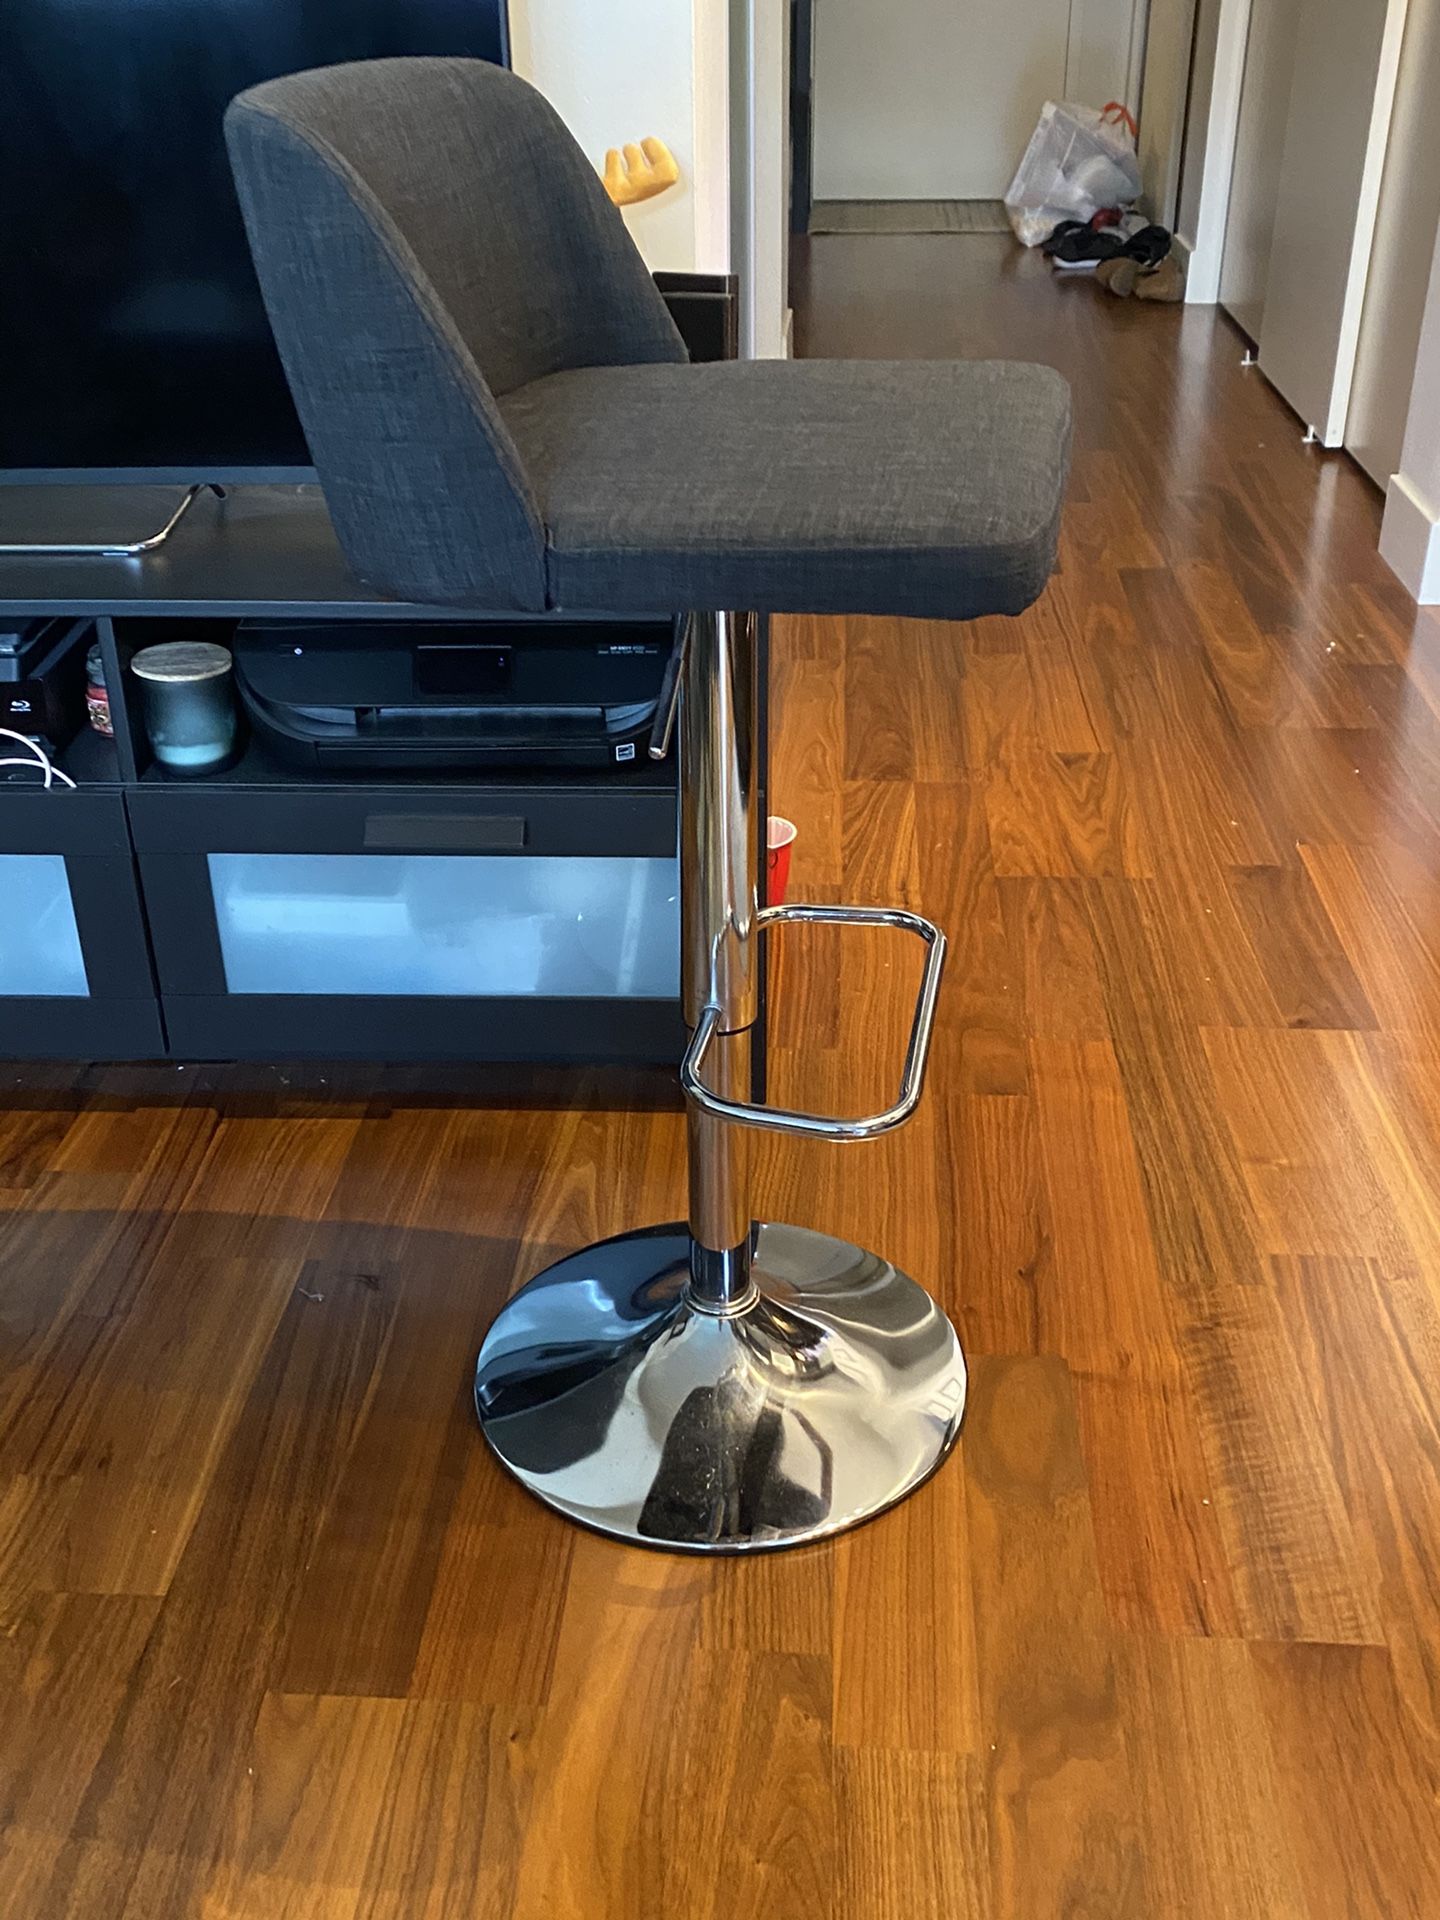 Bar Stool- Adjustable, Silver and Grey, Almost New